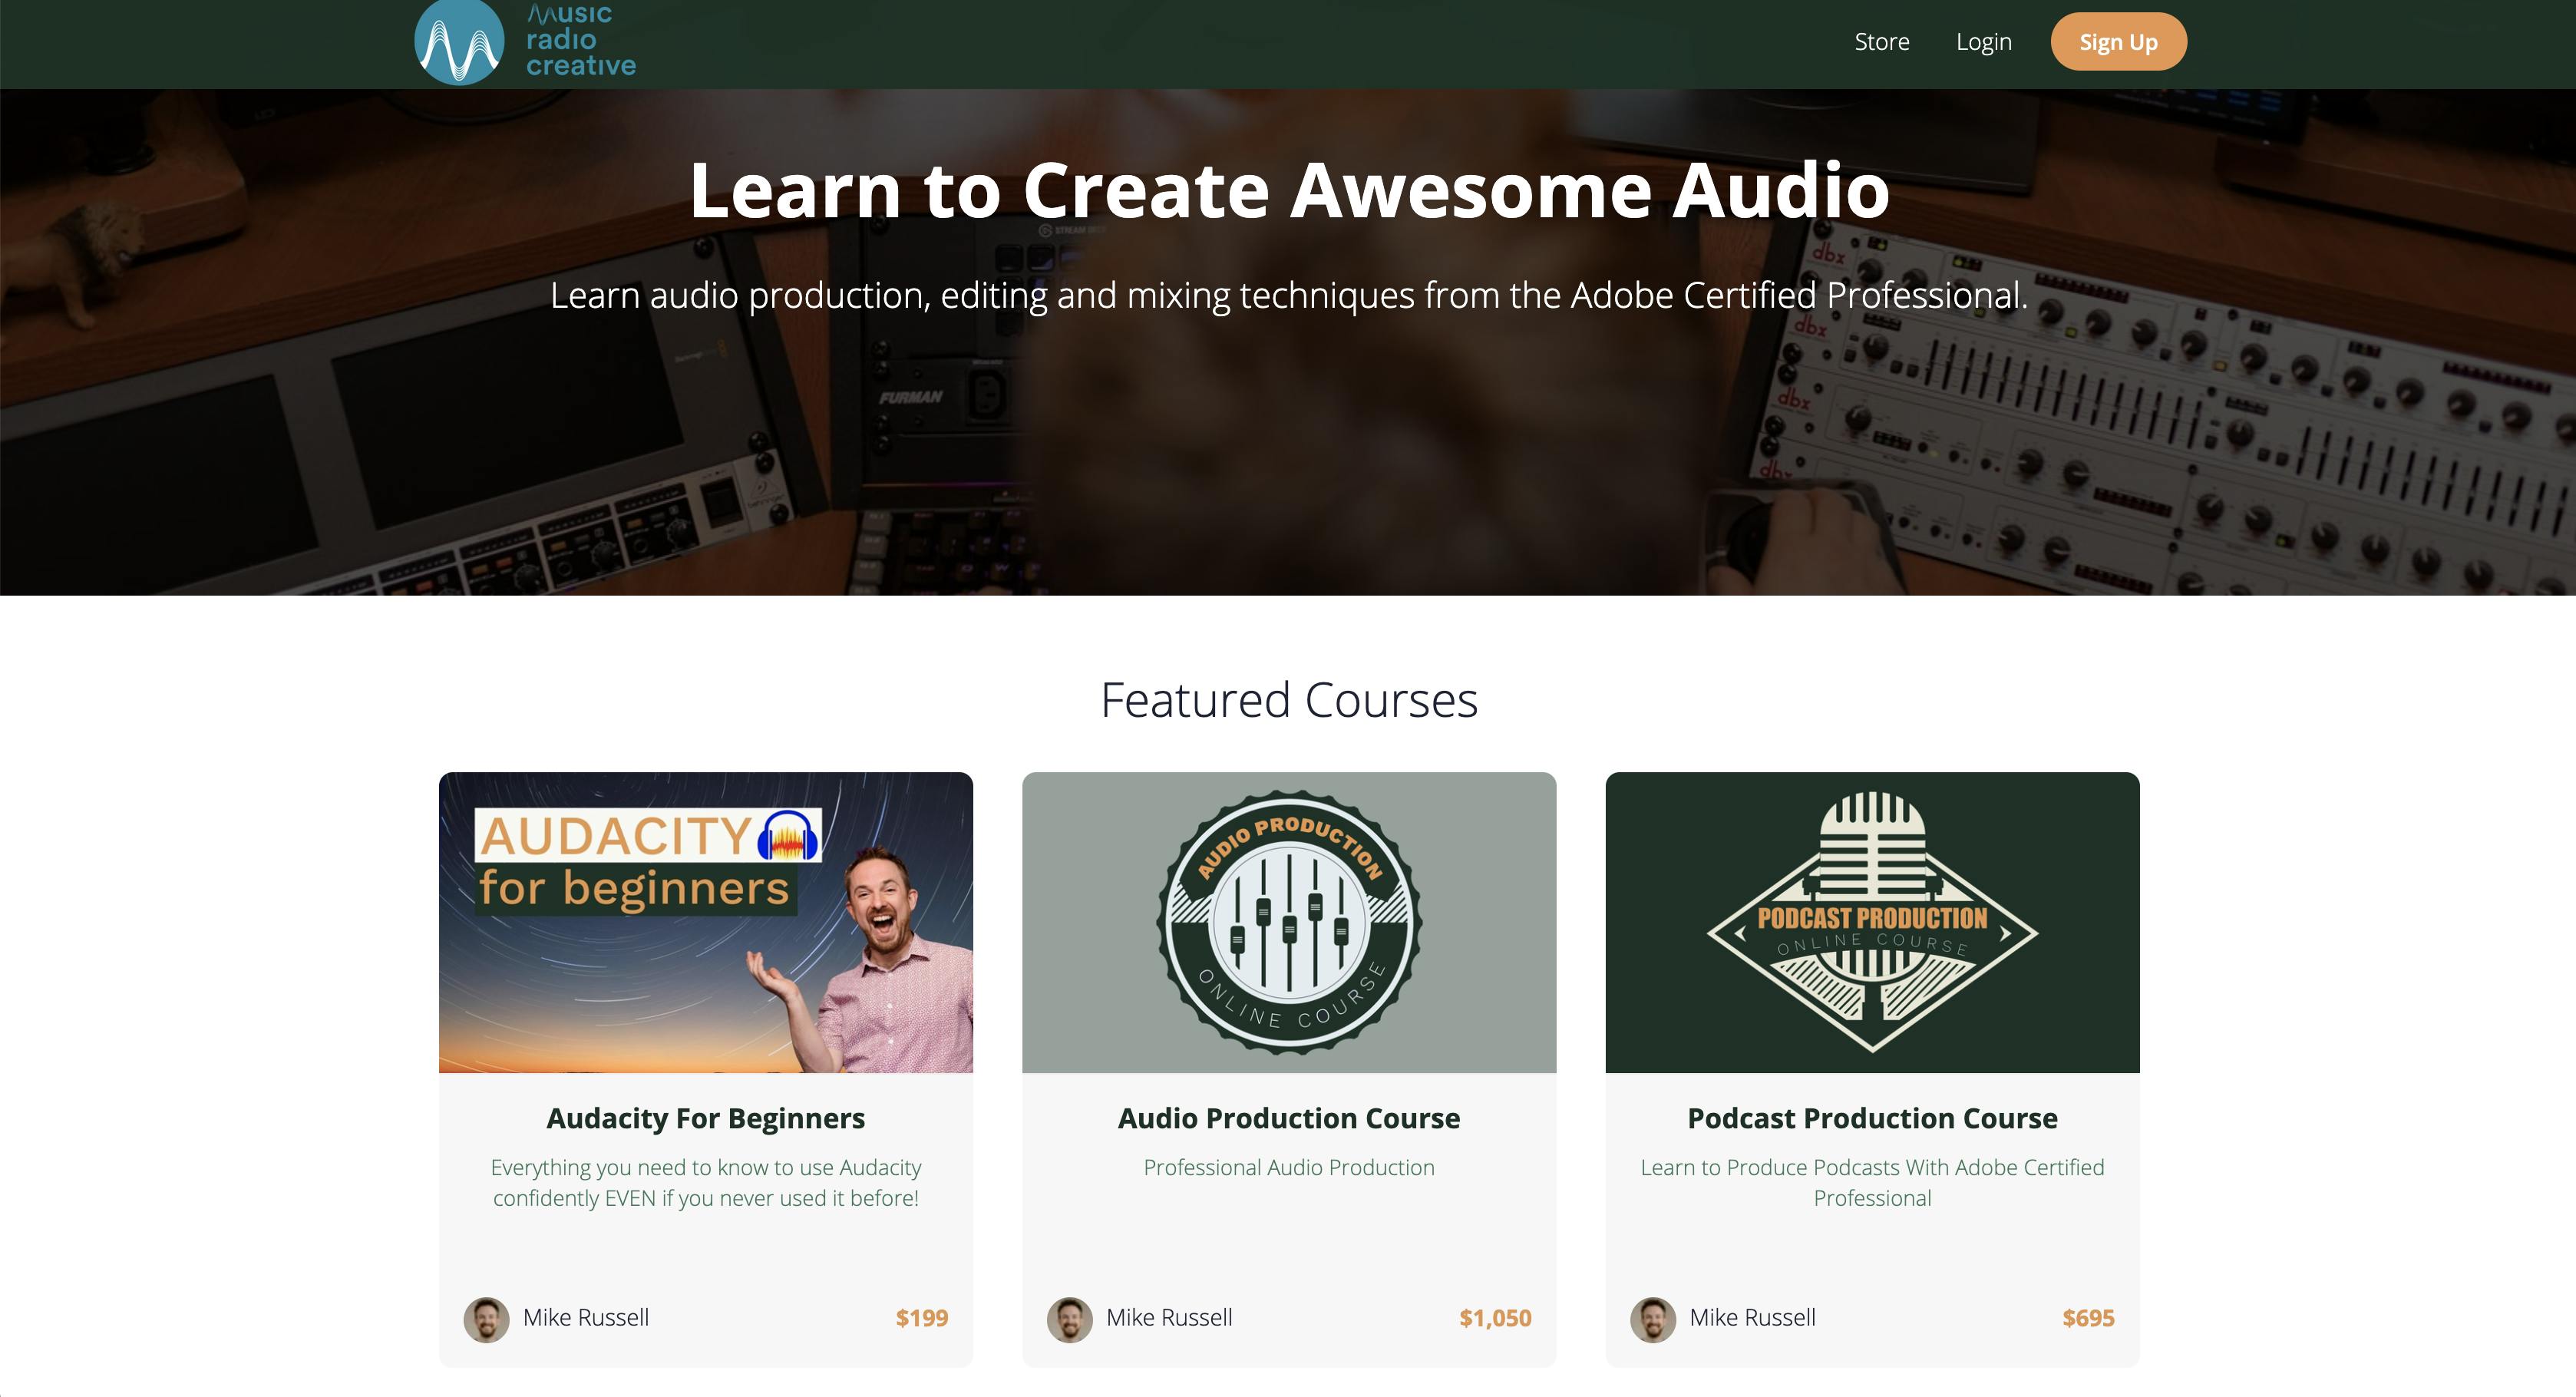 Music Radio Creative homepage with three different featured courses and thumbnails for eeah